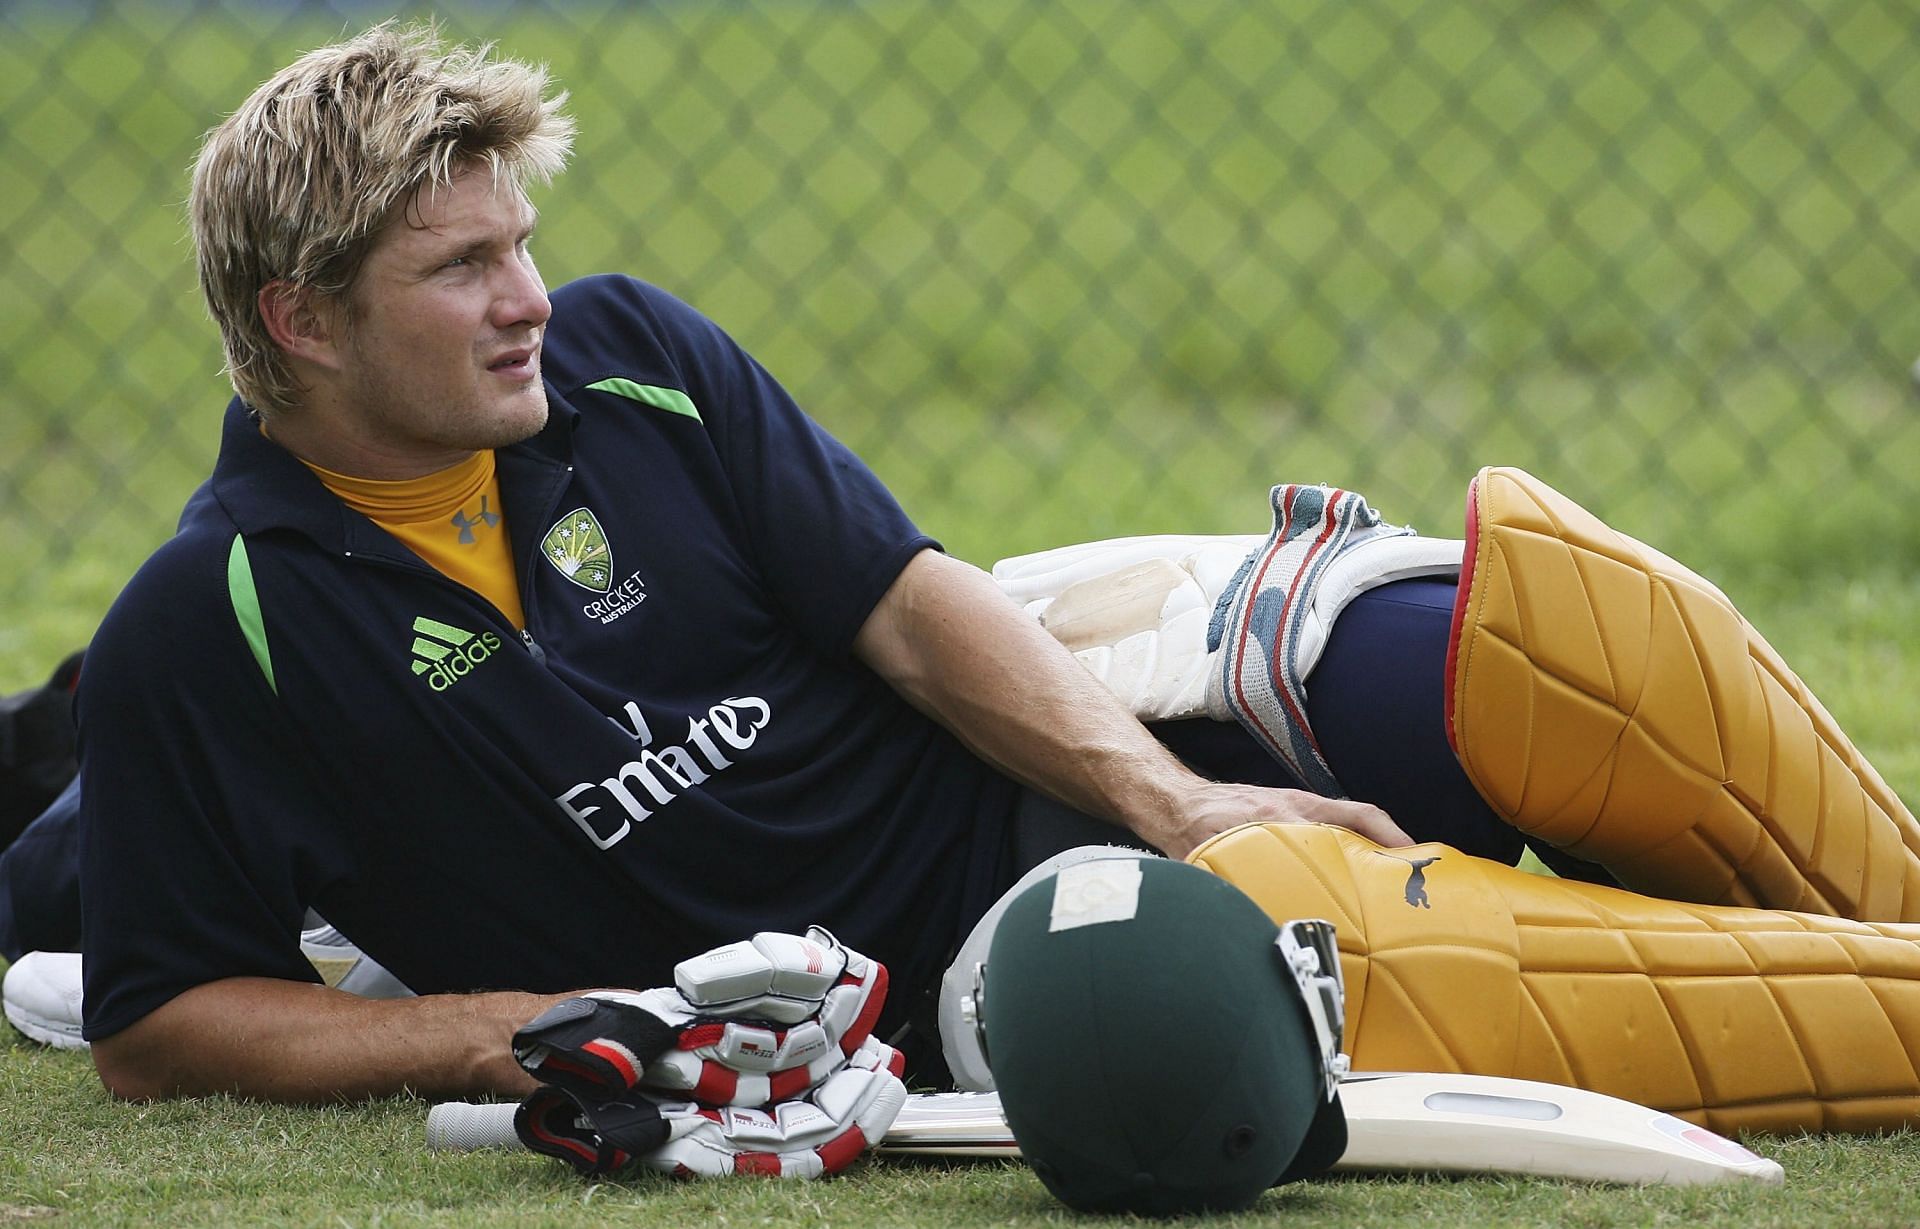 Shane Watson was a vital member in the Australian team for the 2007 World Cup